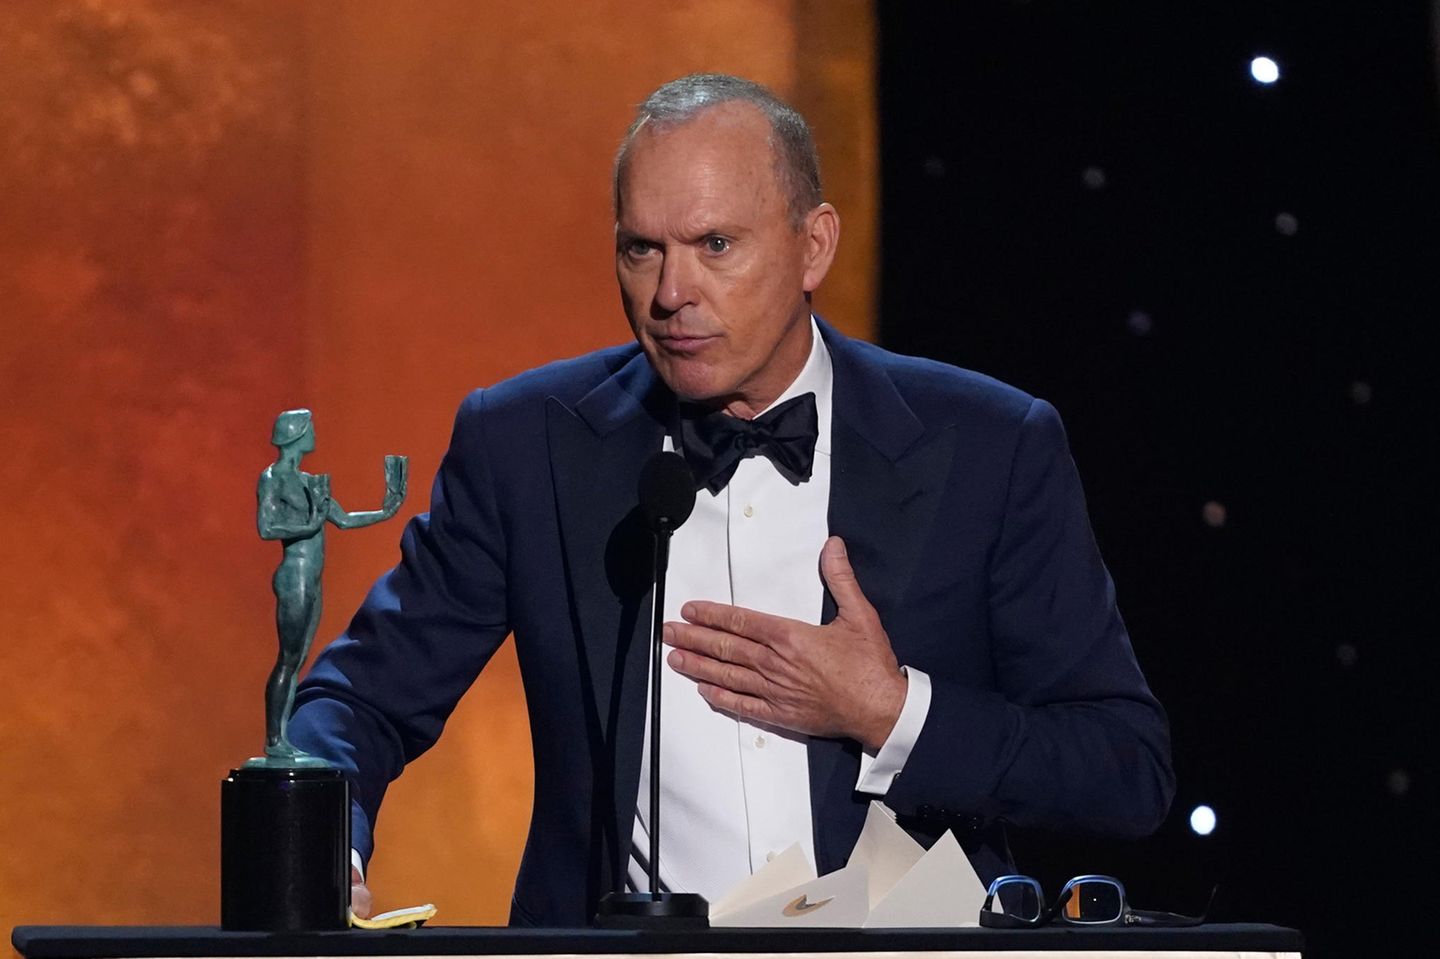 Michael Keaton accepts the award for outstanding performance by a male actor in a television movie or limited series for "Dopes…